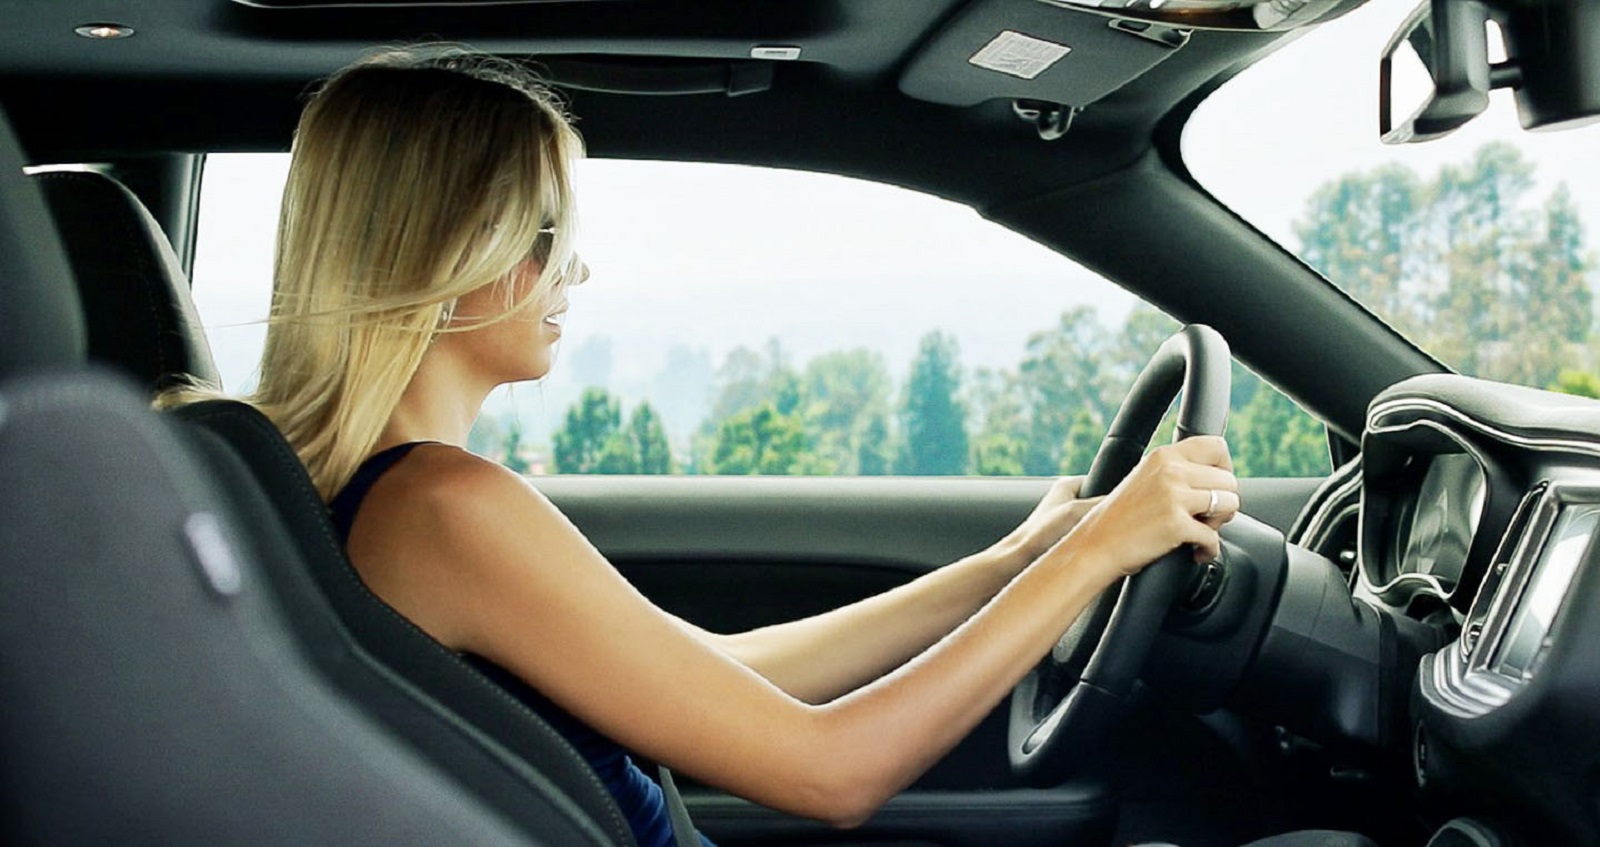 Basic mistakes when driving that many women often make - Photo 1.